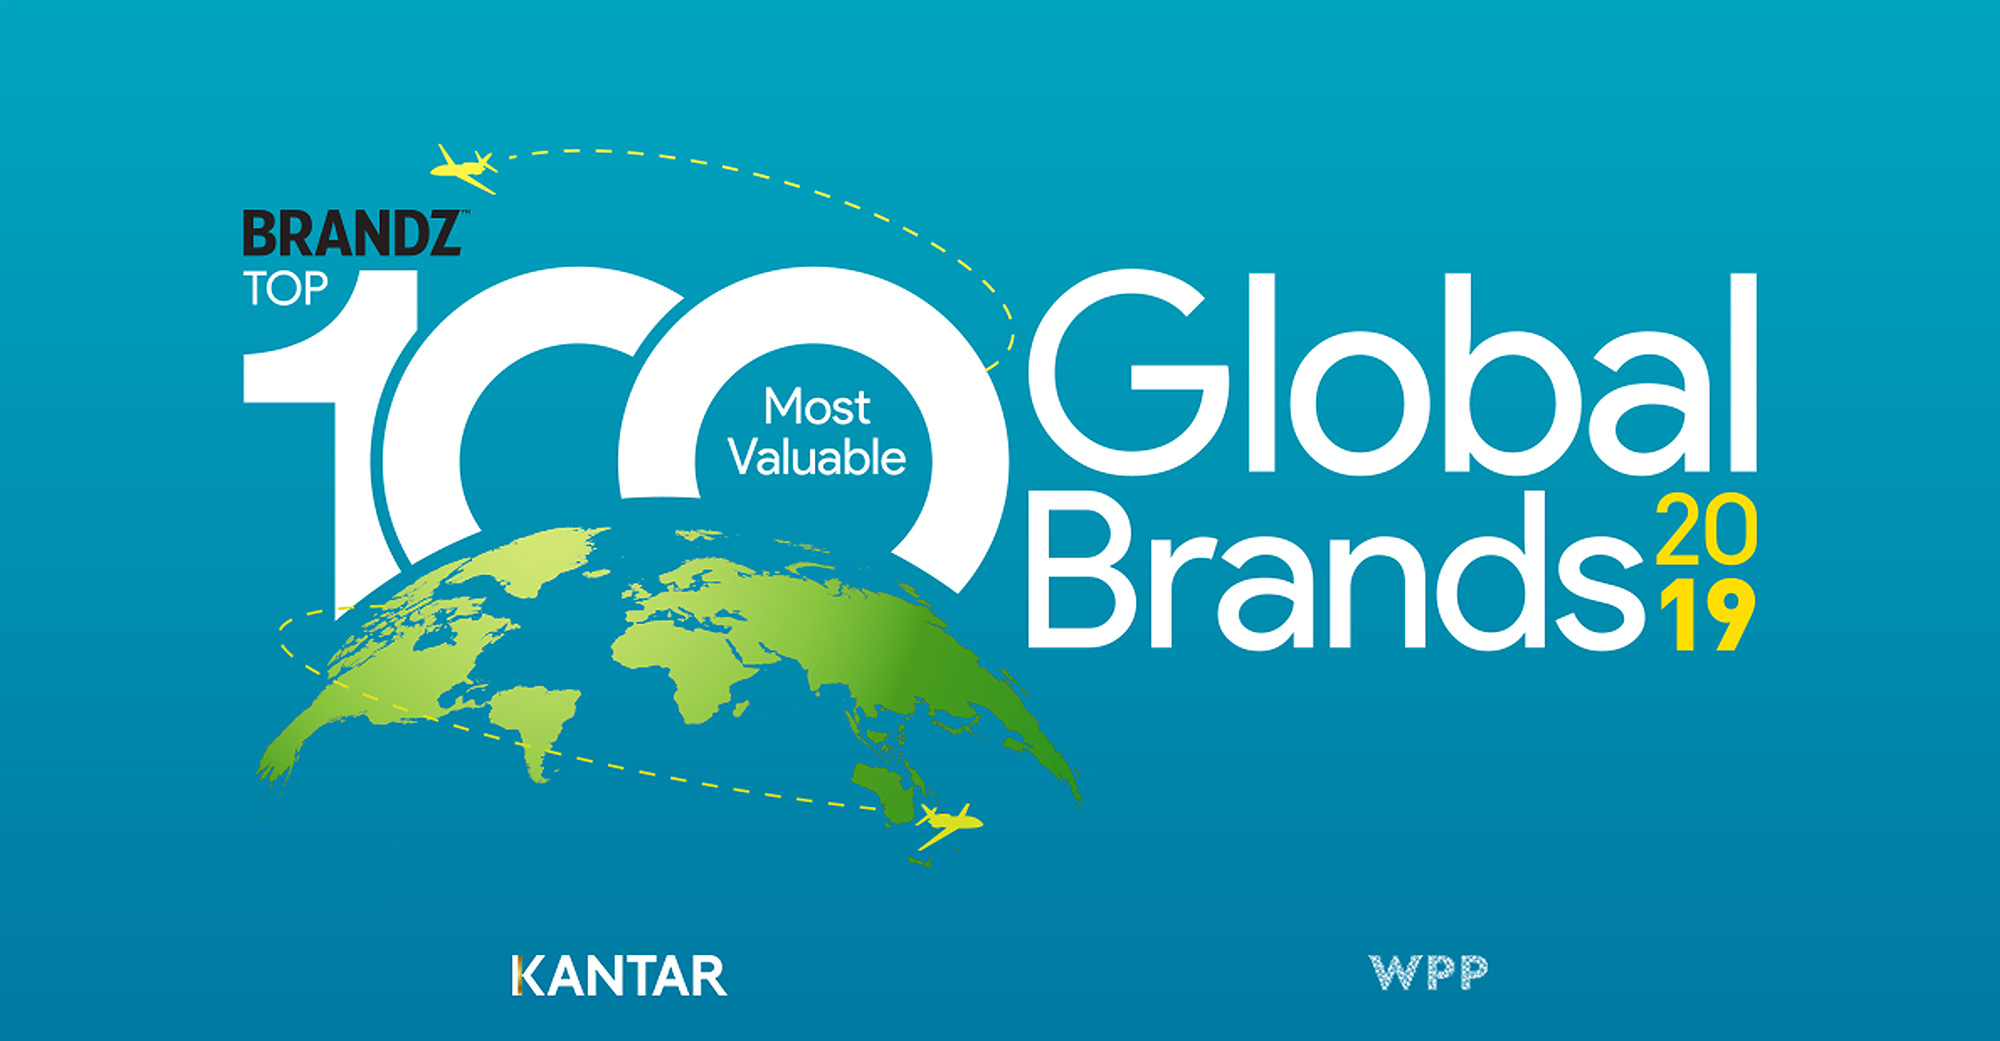 BrandZ Includes 15 Chinese Companies in its Global Top 100 Most Valuable Brands